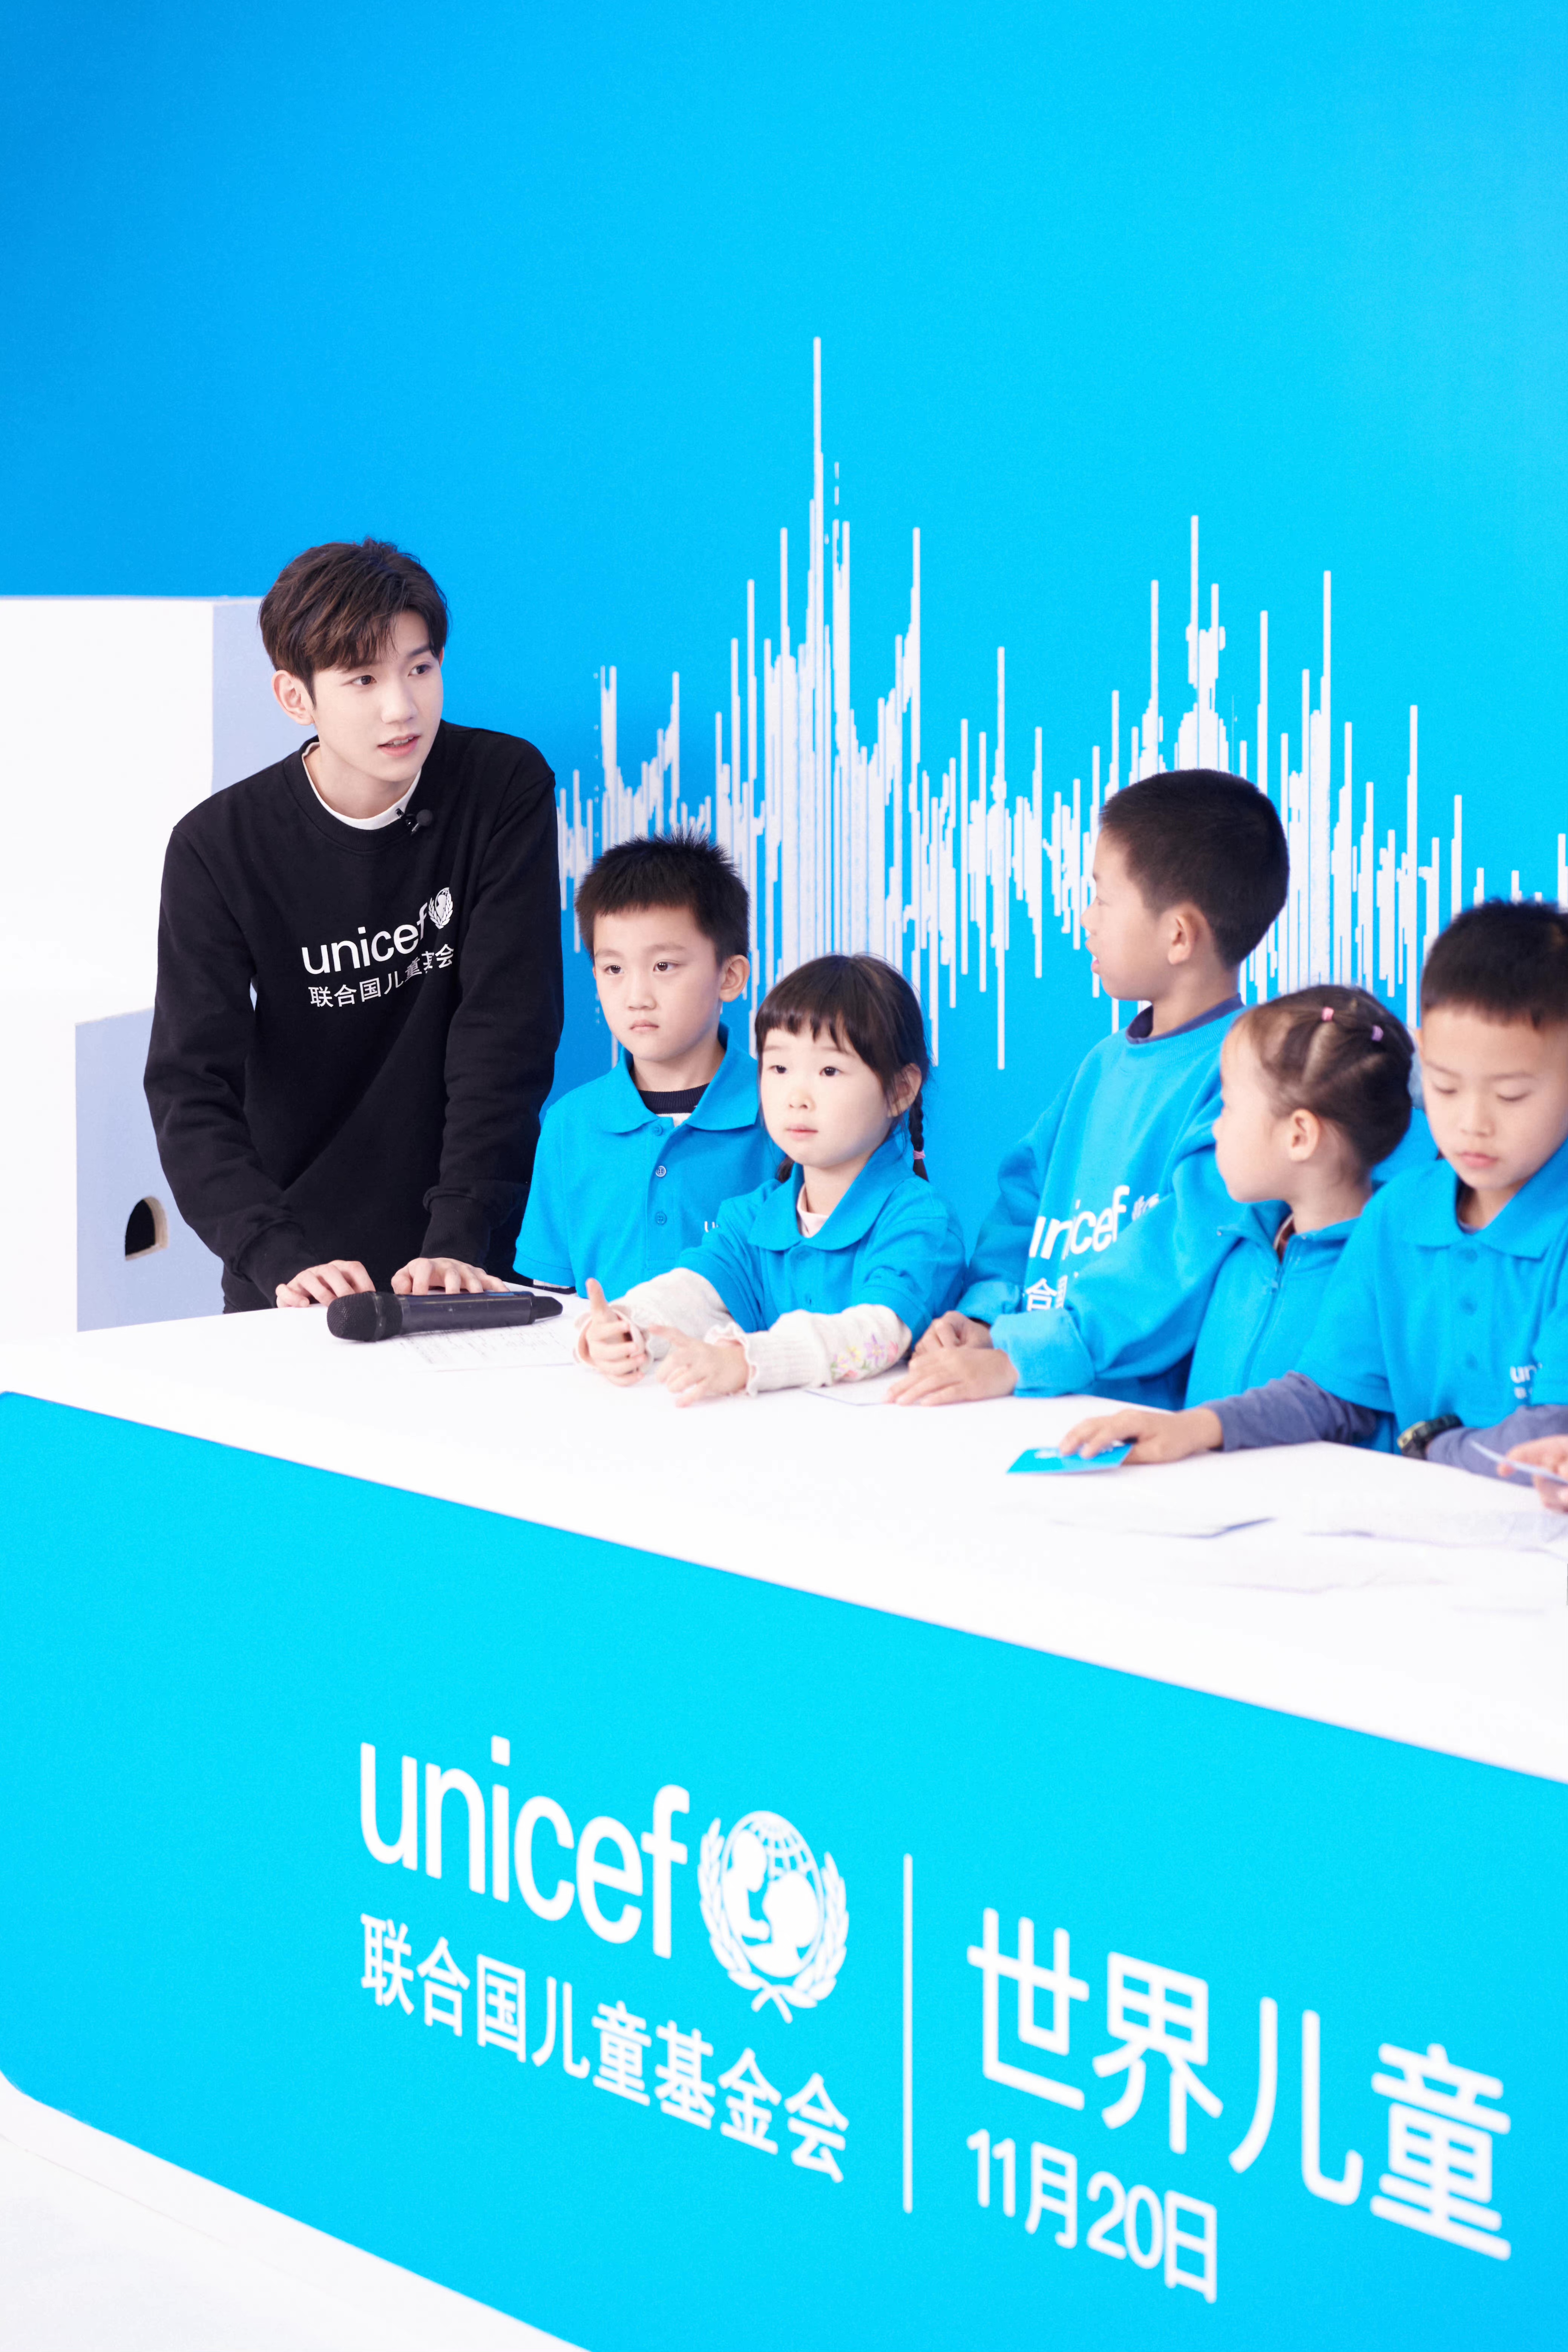 UNICEF Ambassador Wang Yuan teaches children to sing the World Children’s Day theme song ‘In the Future’ during a livestream in celebration of the day in a studio in Beijing on 20 November 2021. The song, written by Wang Yuan, was released earlier on the day. It was inspired by his hopes for the future of children and young people.